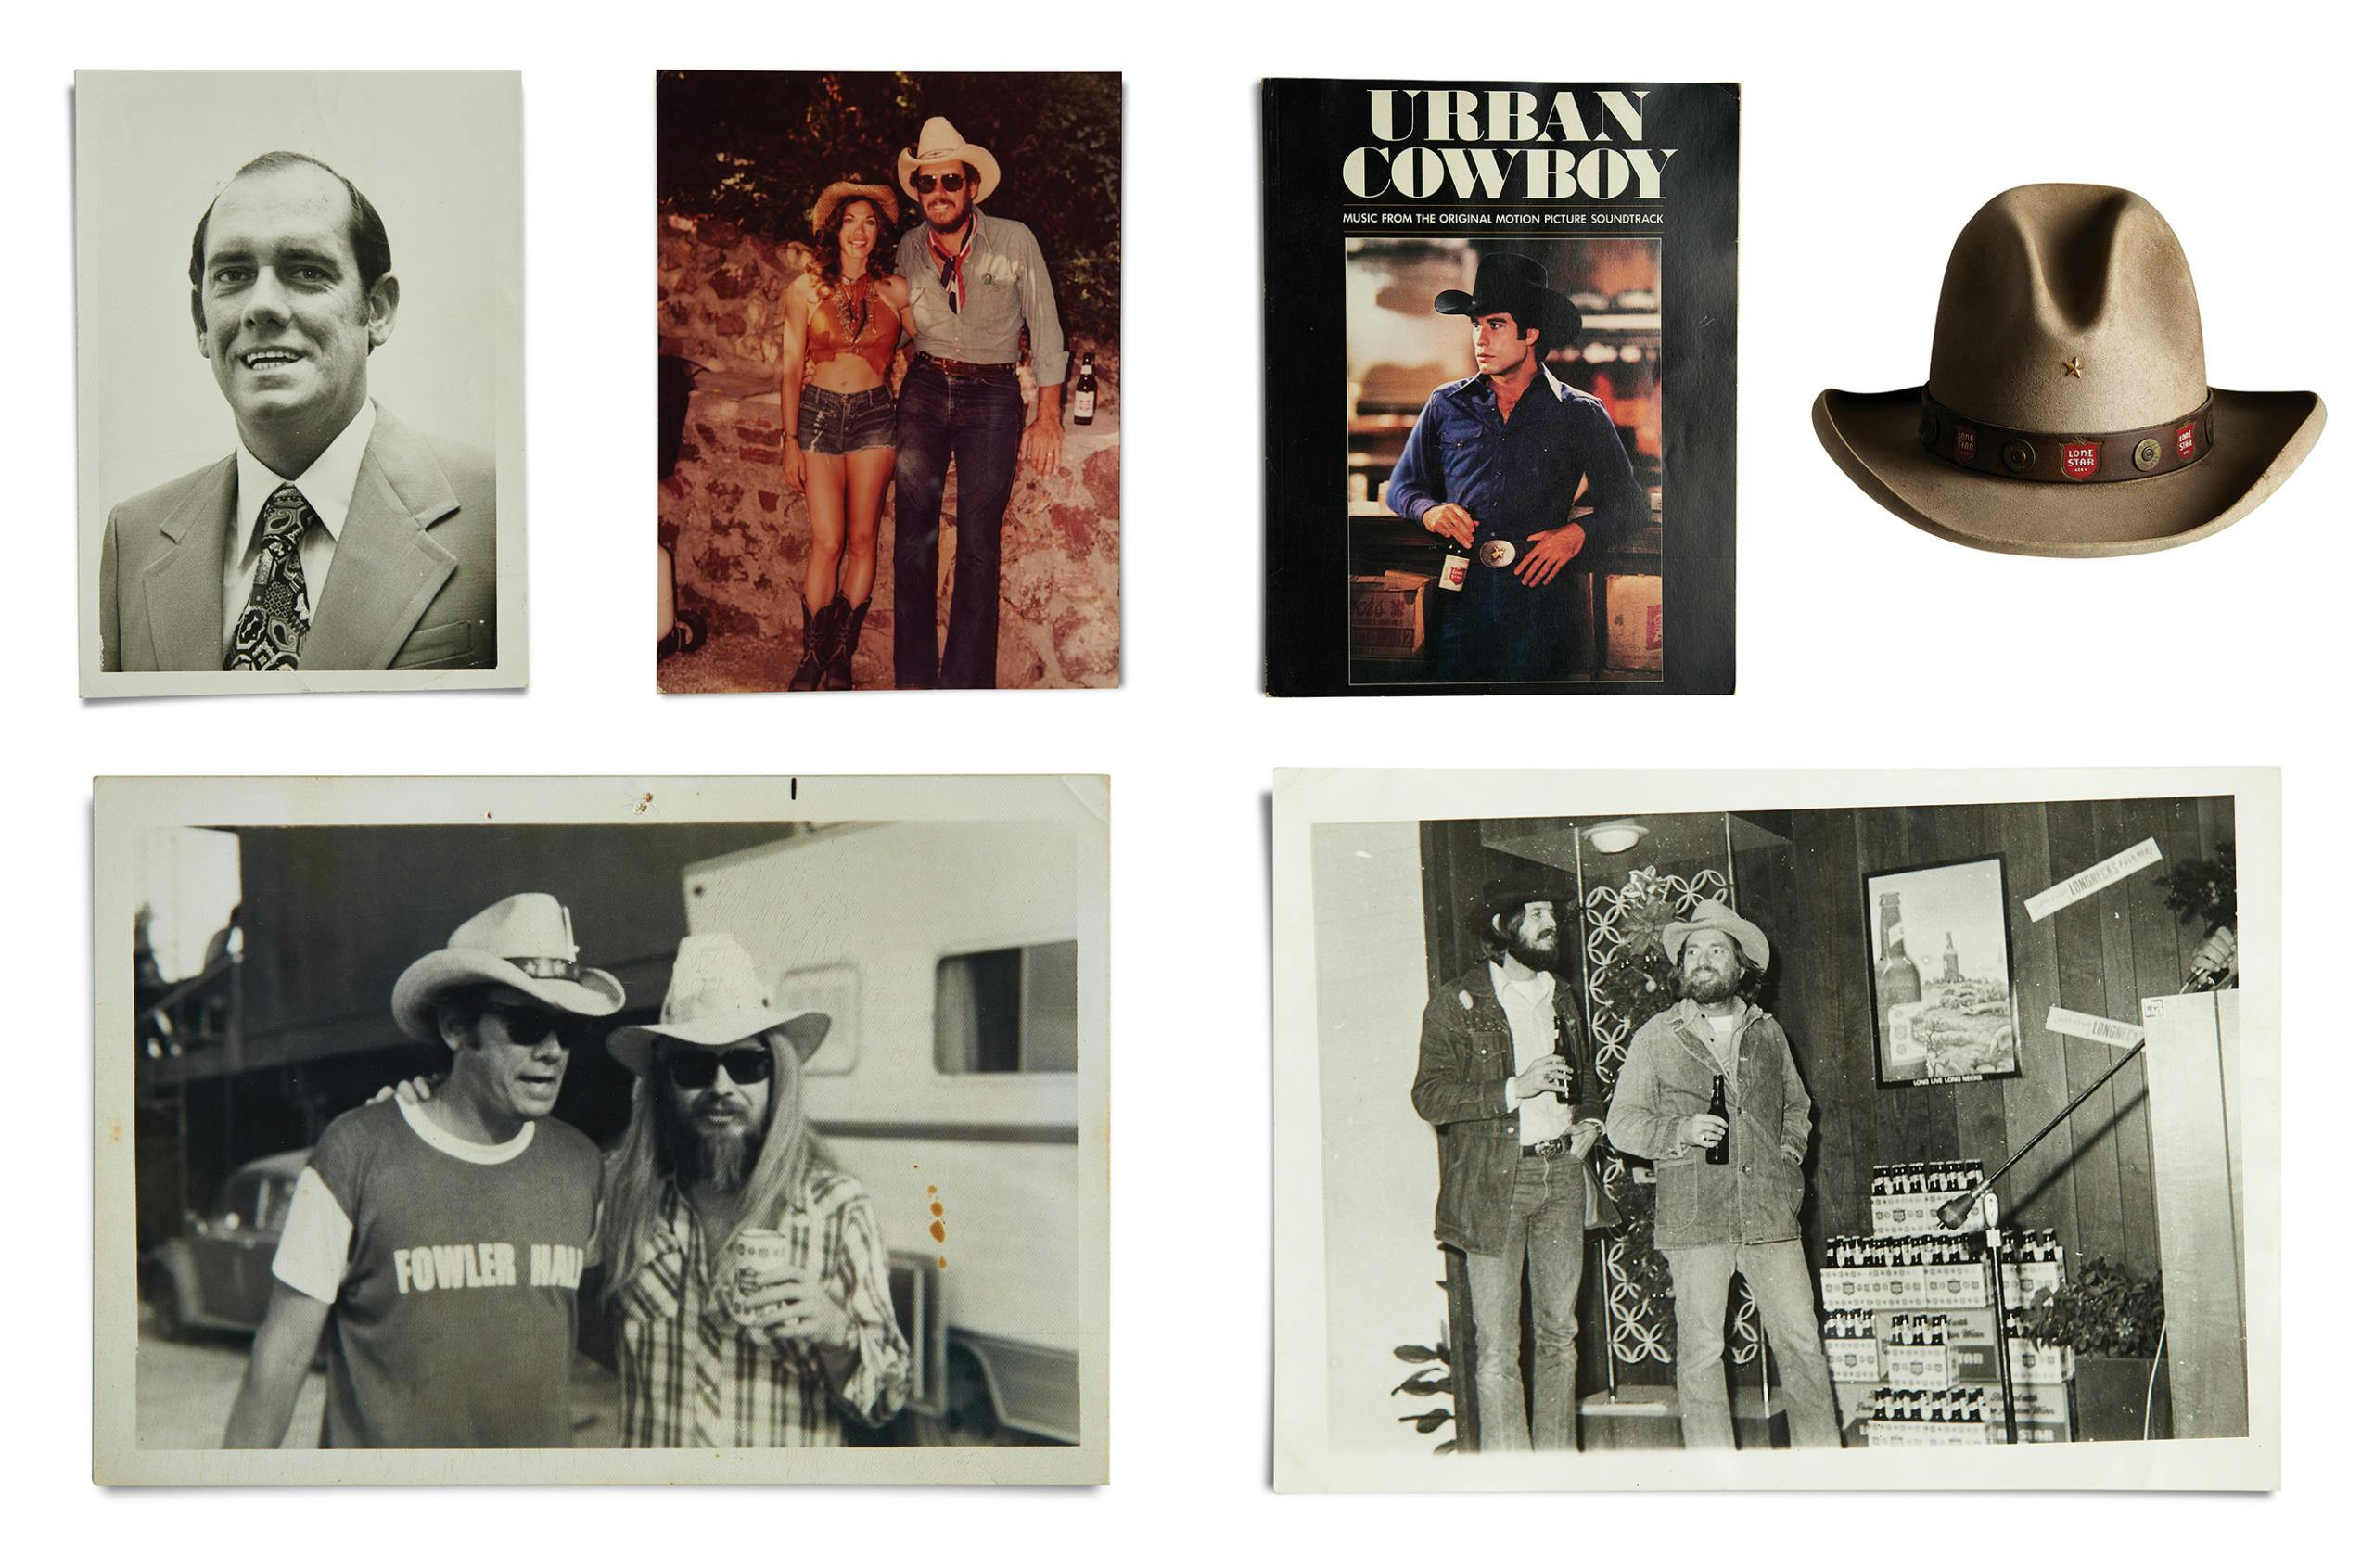 Left to right: Retzloff in 1973 as a district manager; Retzloff photographed six years later with Playboy model Barbi Benton; an Urban Cowboy songbook; the Lone Star Dude hat designed by Manny Gammage; Retzloff and Leon Russell at Willie's picnic in 1974; and Willie at one of several Lone Star sales meetings where he performed.